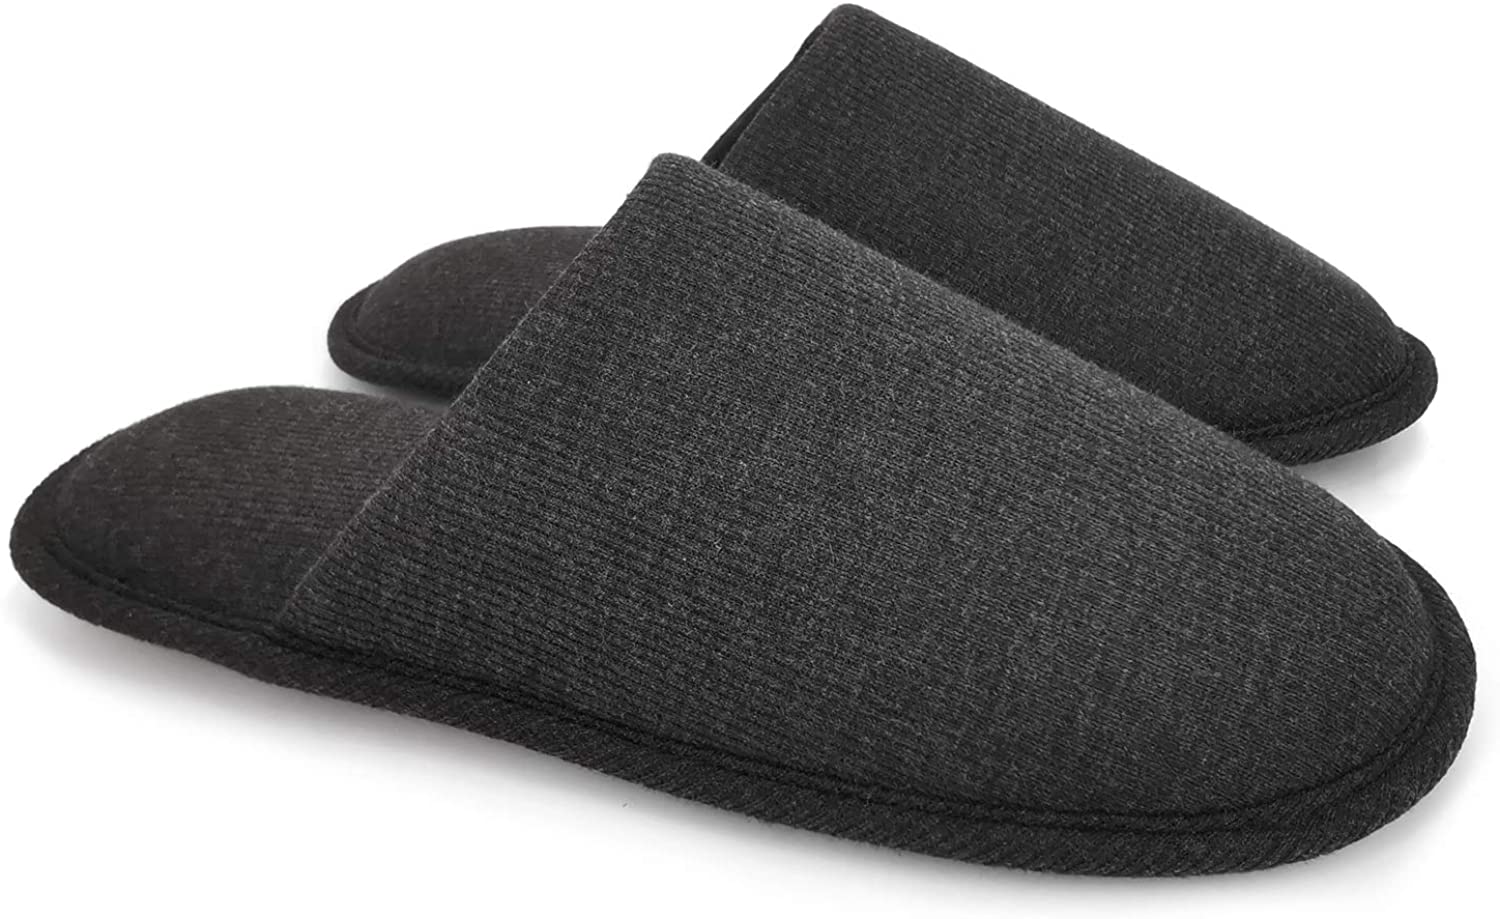 ofoot Men's Organic Cotton Cozy Indoor Slippers Memory Foam House Flat,Washable Slip on Home Shoes 